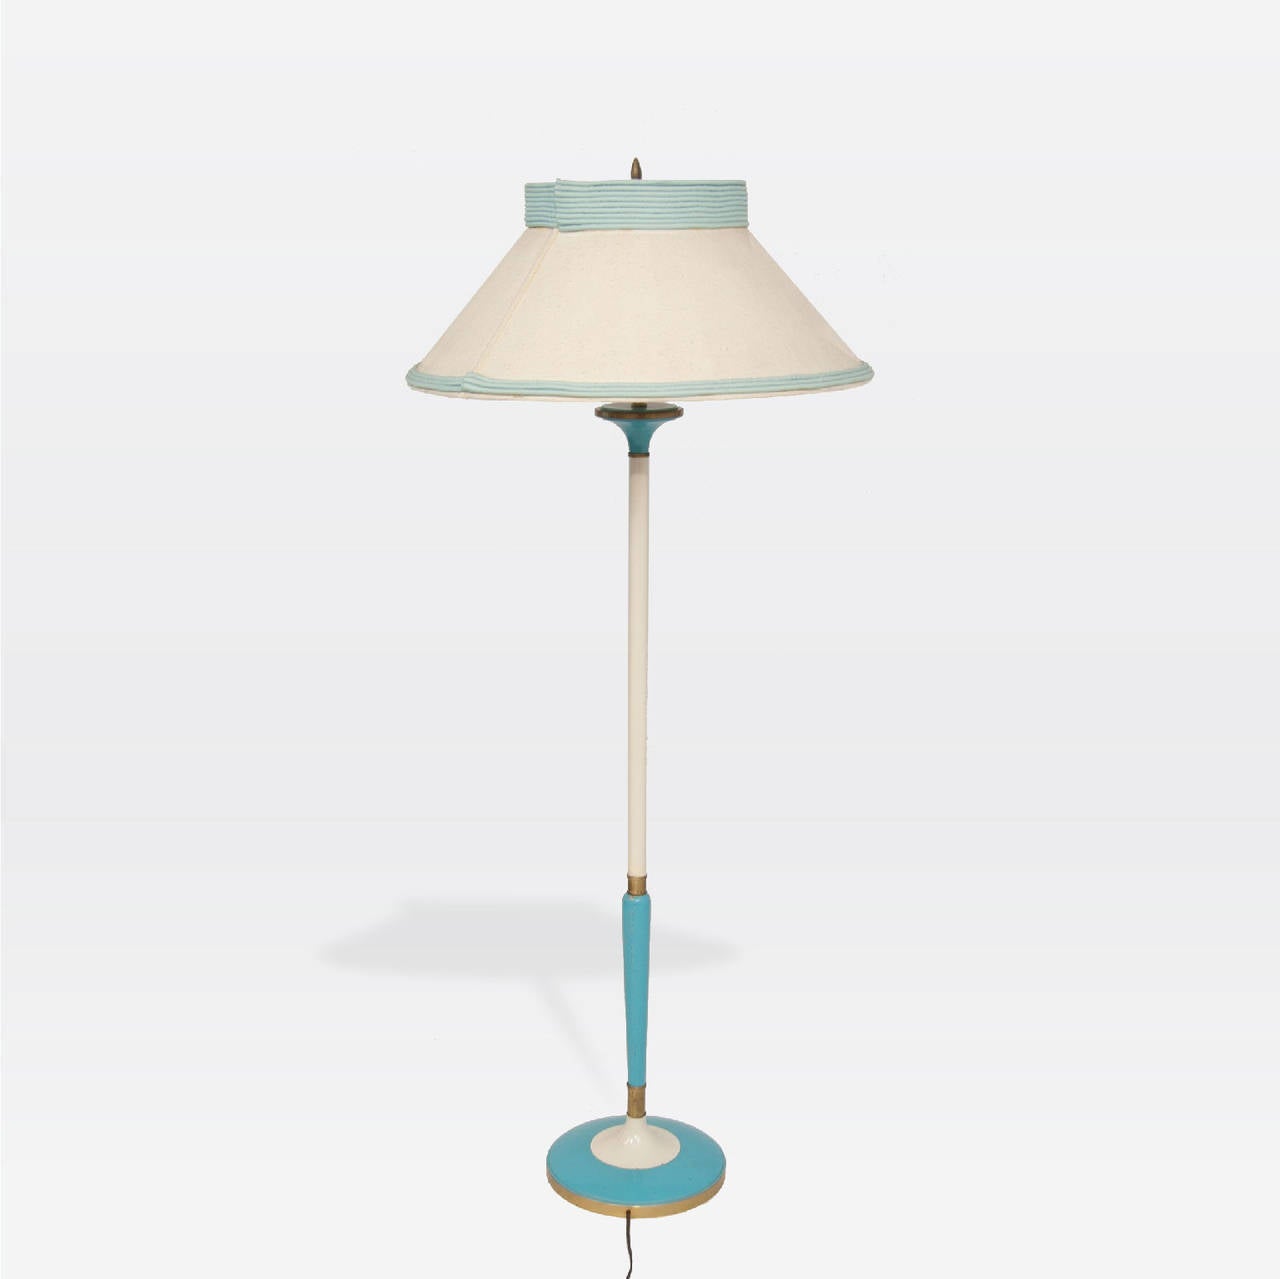 Blue and white enameled metal floor lamp. Original shade is linen with blue fabric piping over white milk glass.